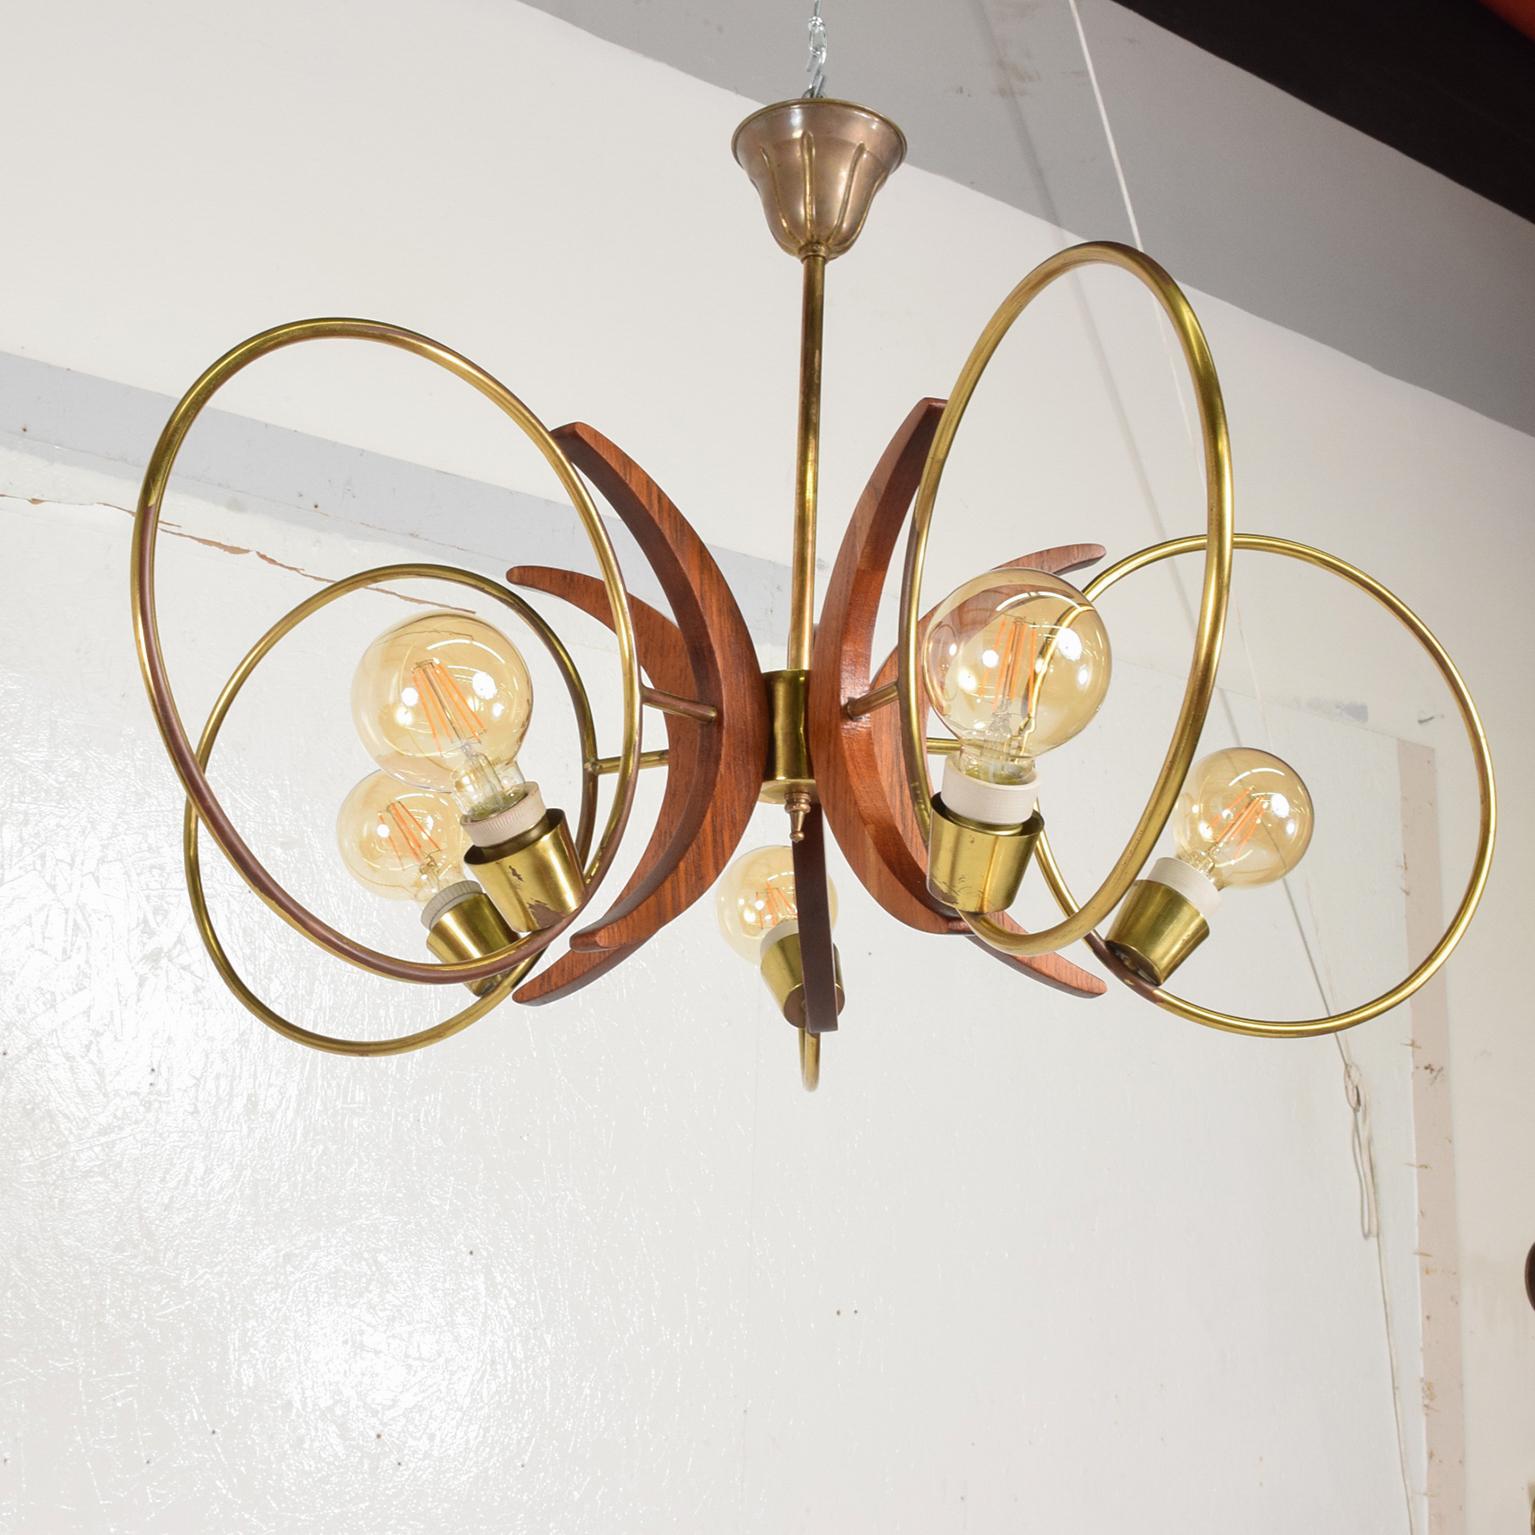 1960s Alluring Five Ring Sculptural Chandelier Brass and Mahogany Mexico City For Sale 1